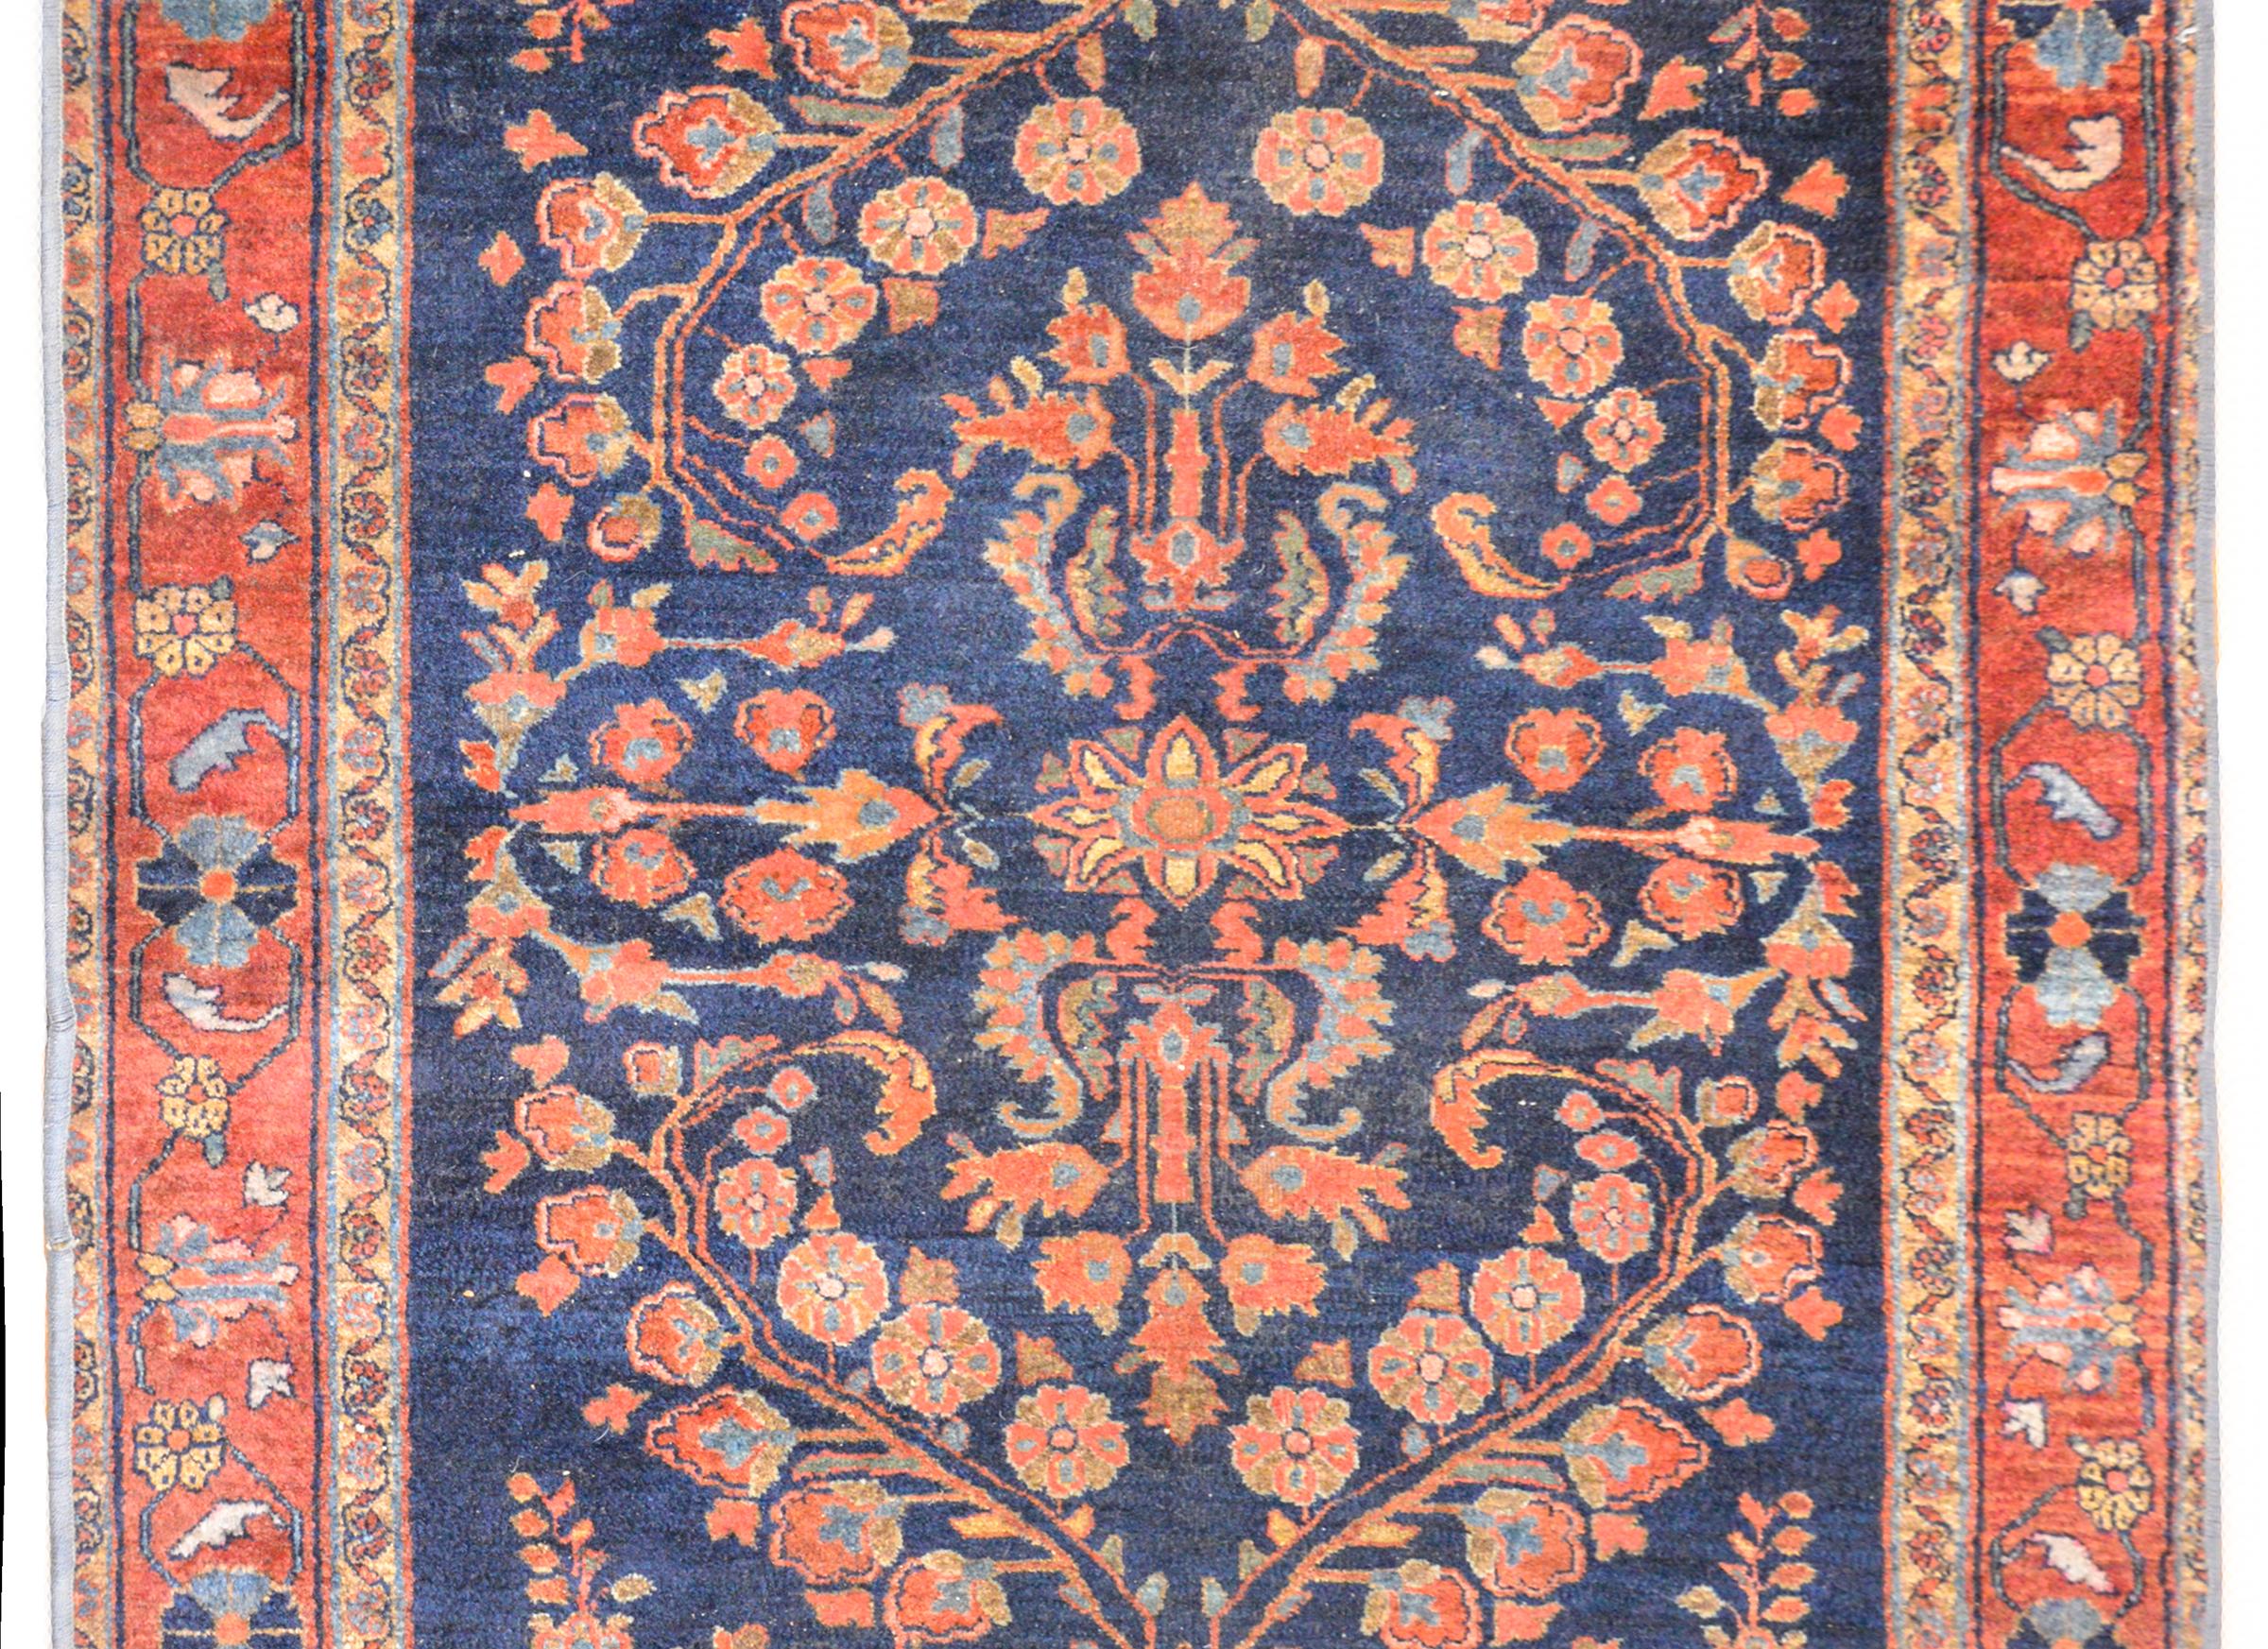 A charming early 20th century Persian Sarouk rug with a beautiful mirrored scrolling vine and floral pattern woven in coral, orange, pink, and indigo against a dark indigo background. The border is wonderful with a beautiful floral and scrolling